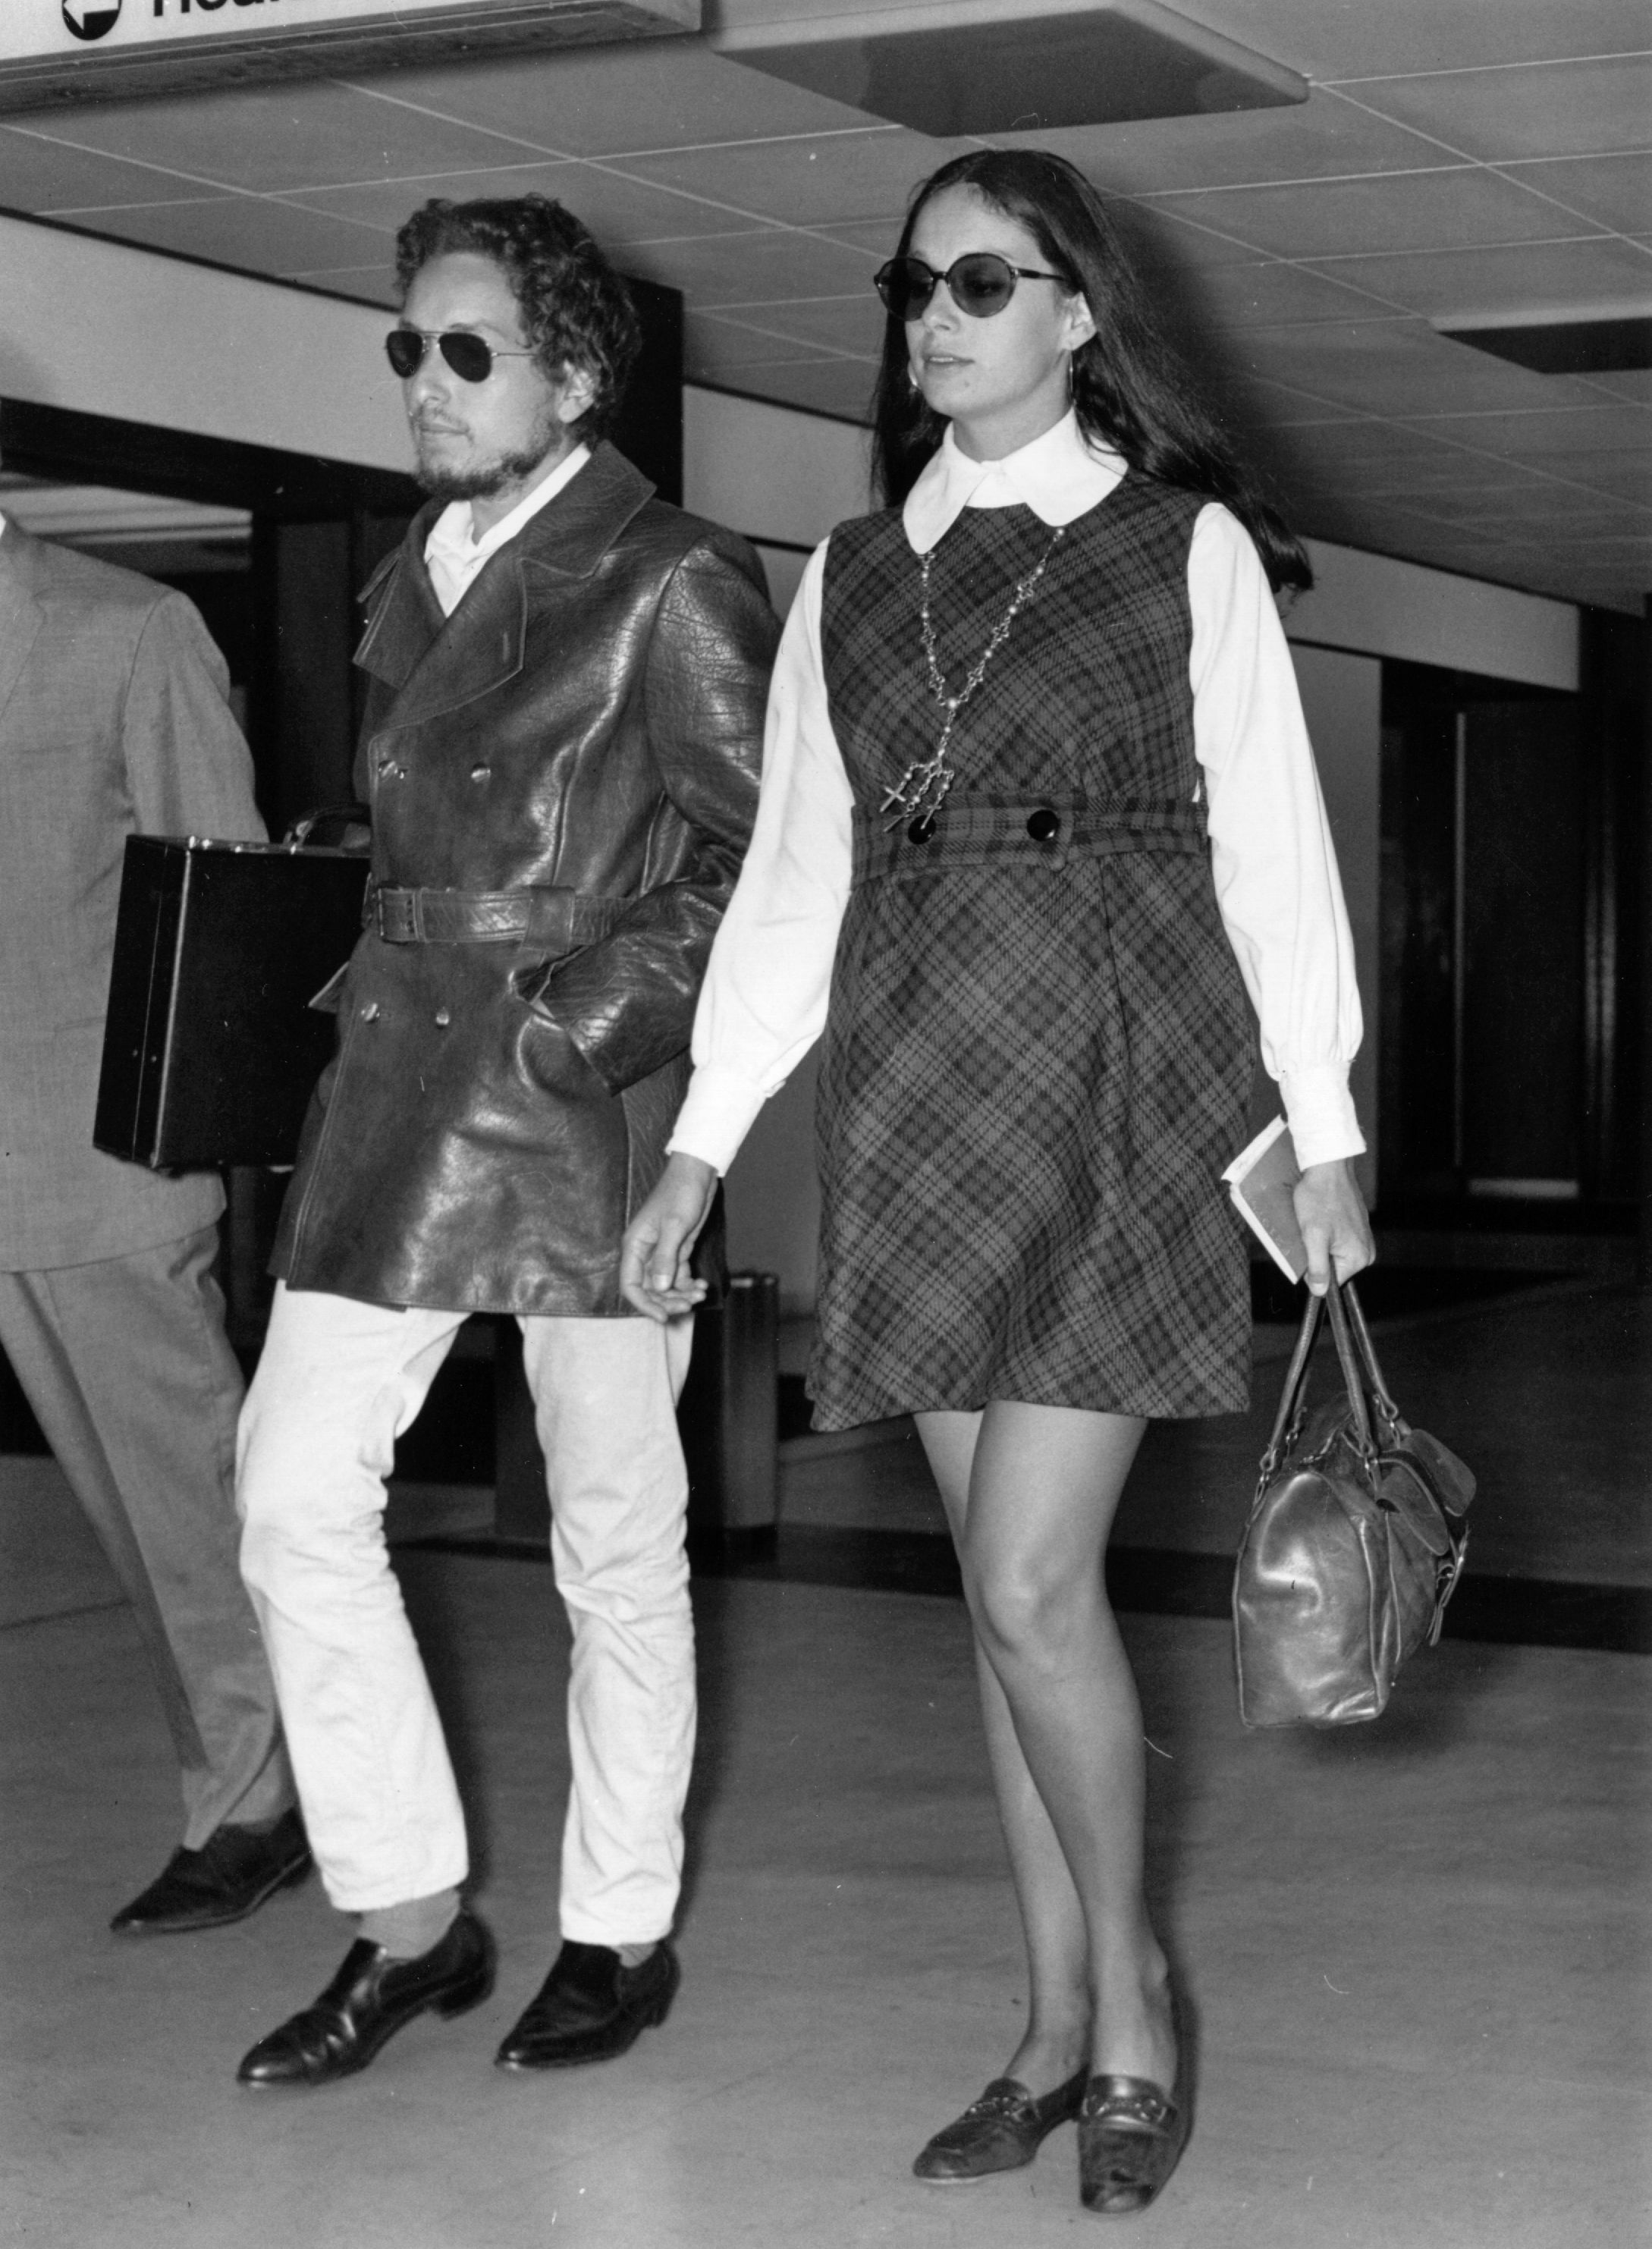 Bob Dylan and his then-wife, Sara Dylan, arrive at an airport on September 2, 1969. | Source: Getty Images